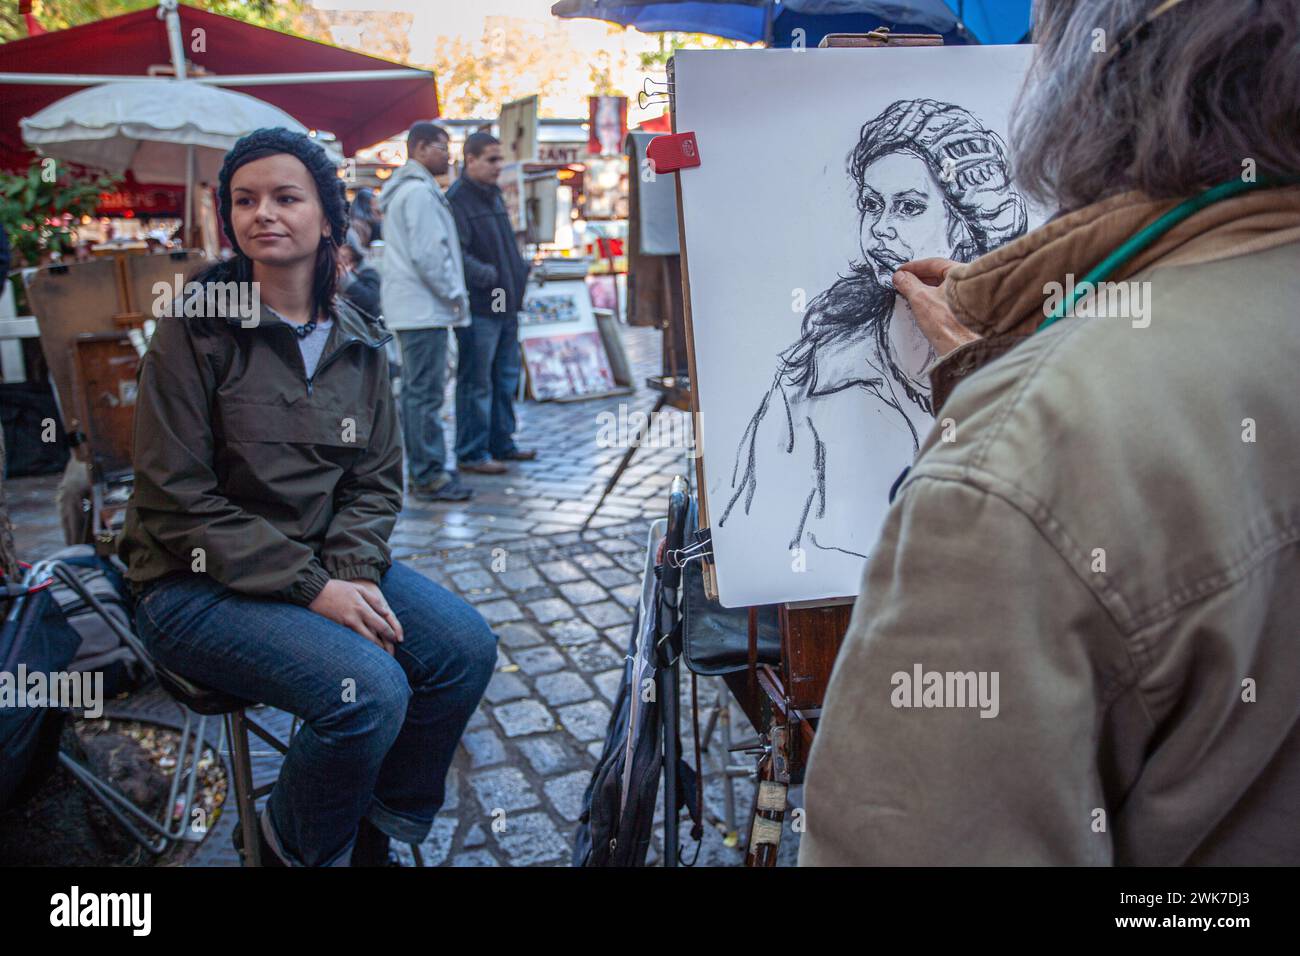 A painter is drawing a young female at Place du Tertre, the famous artists square and tourist attraction in Montmartre, Paris. Stock Photo